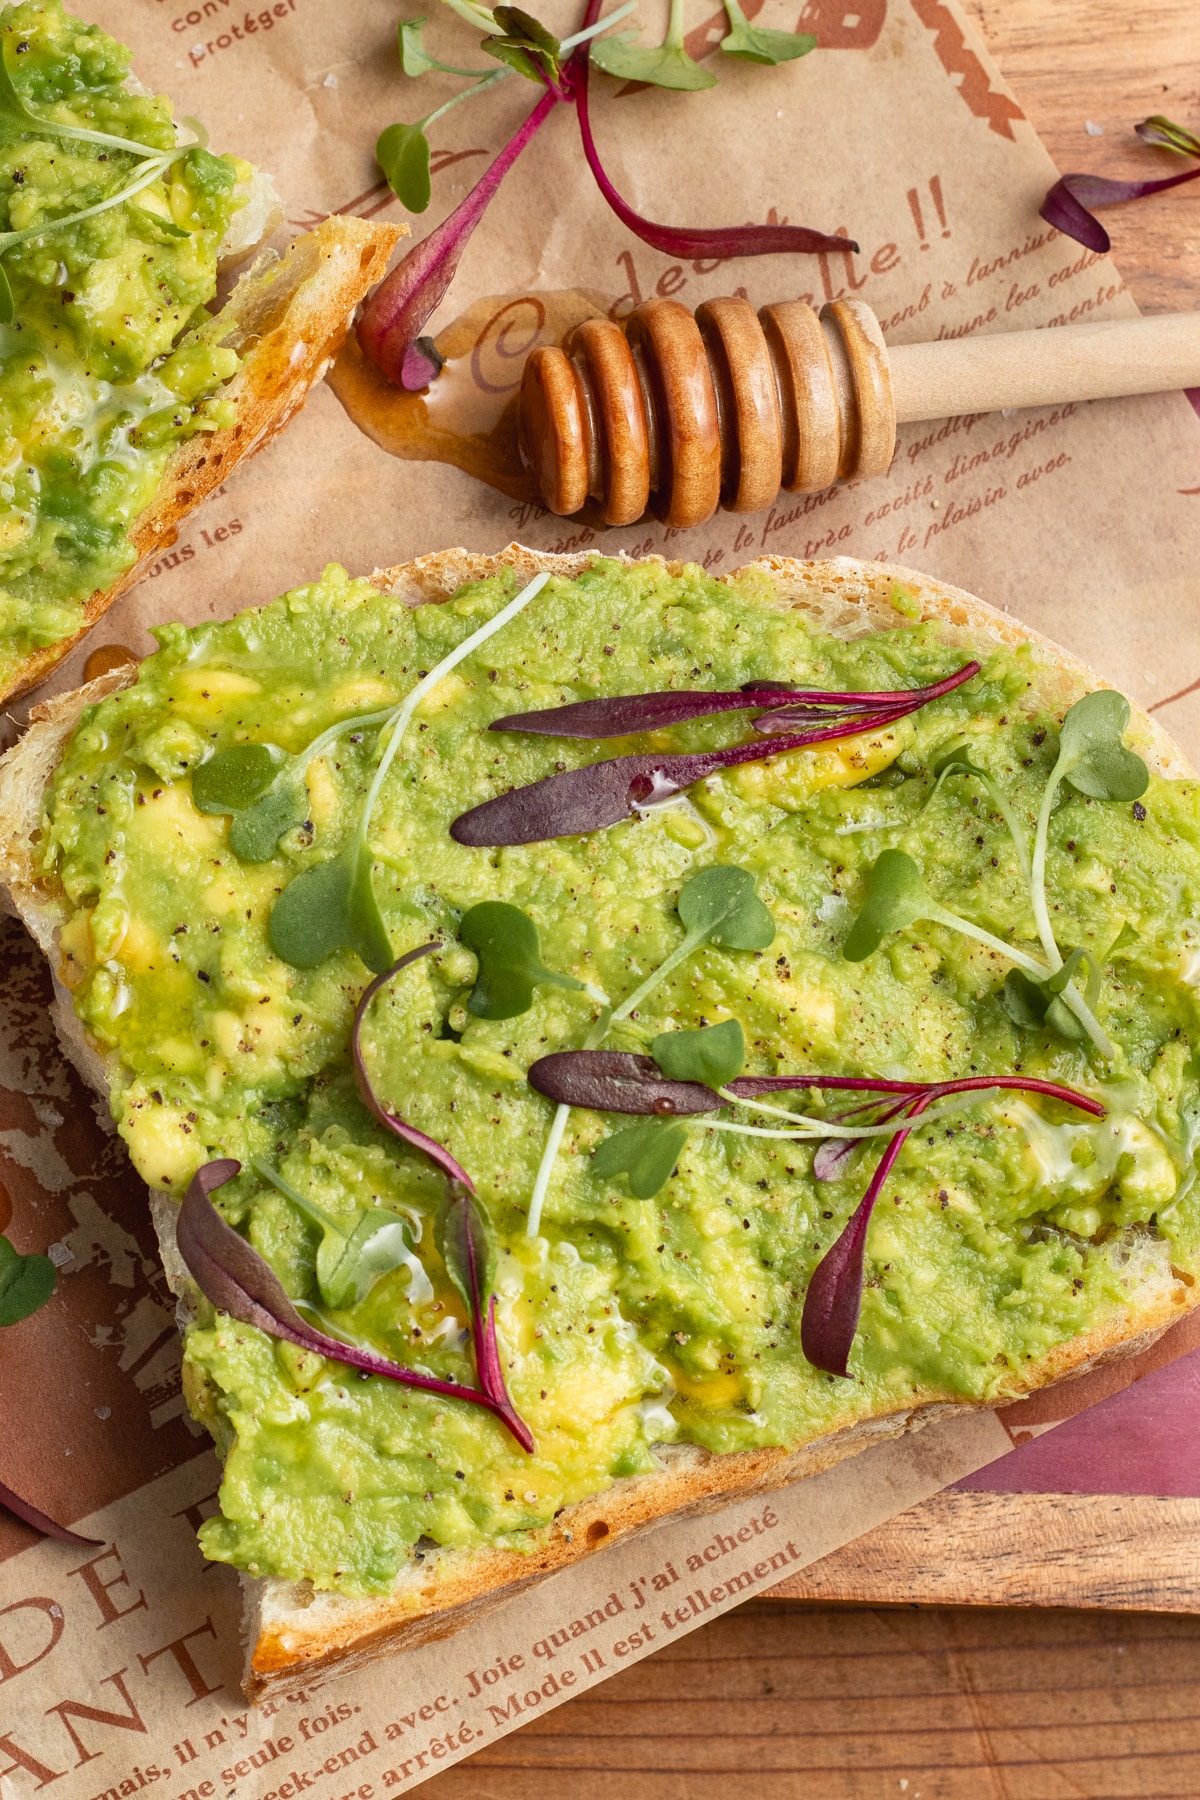 This is a picture of an avocado toast close-up.